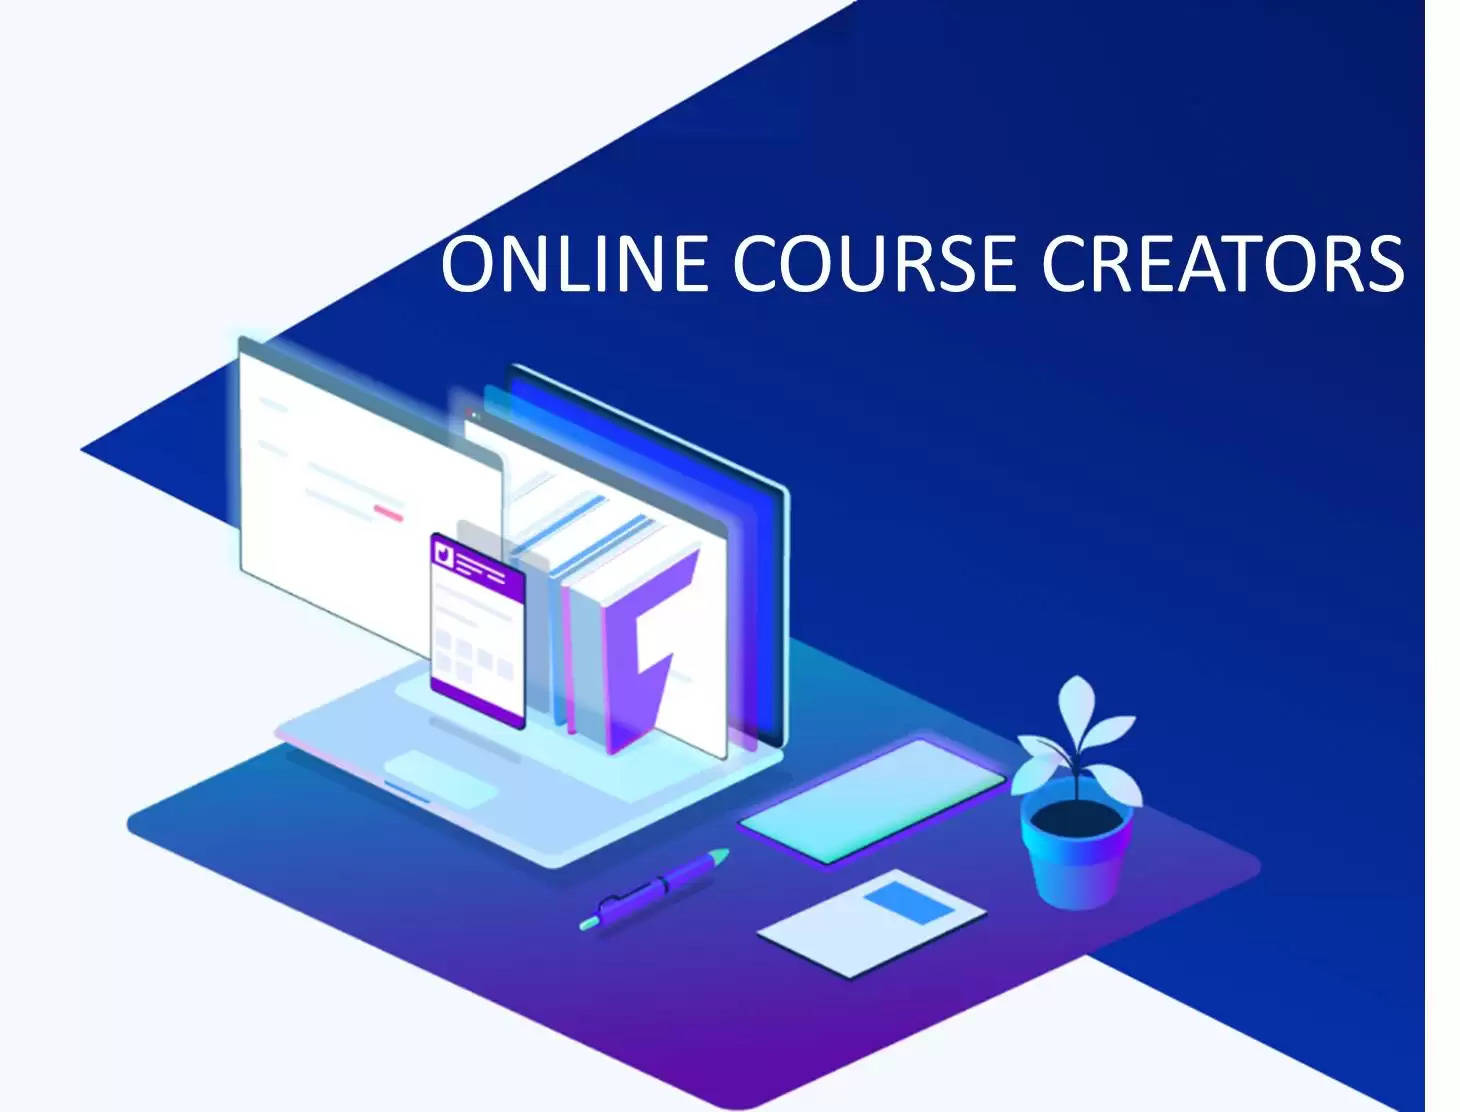 online course creators common mistakes by online course creators how to look for the best online course